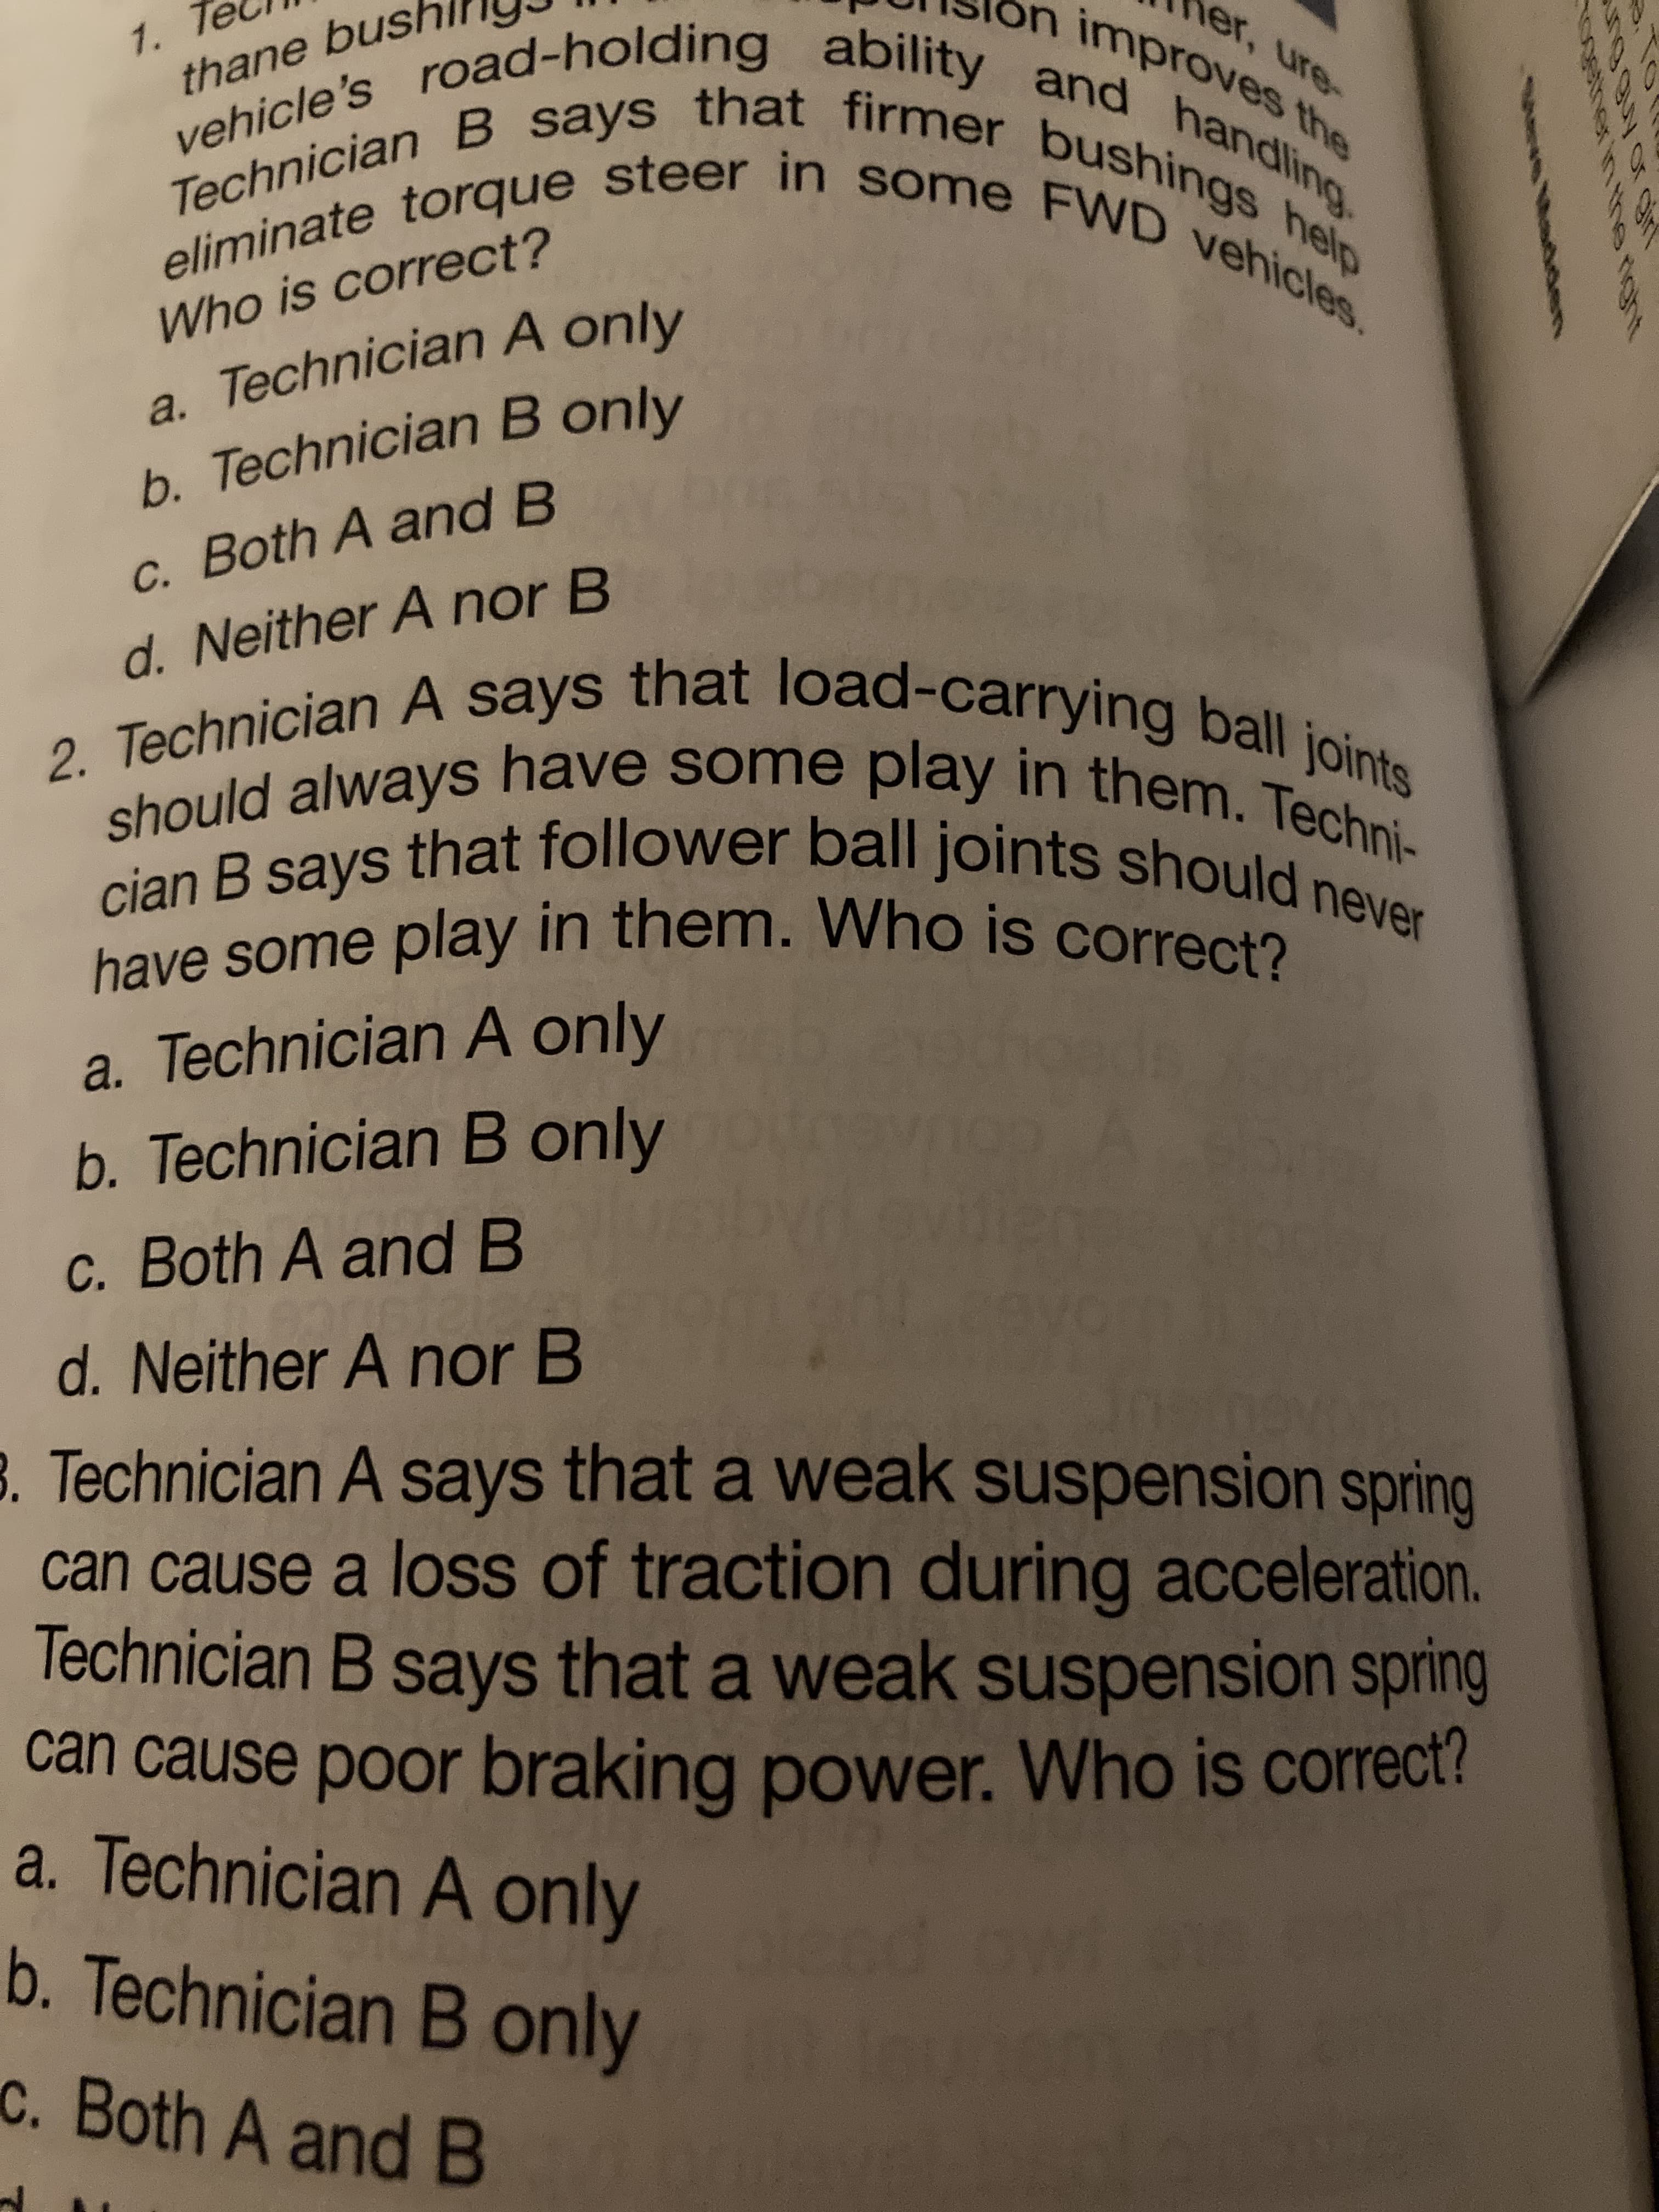 2. Technician A says that load-carrying ball joints
should always have some play in them. Techni-
cian B says that follower ball joints should never
have some play in them. Who is correct?
